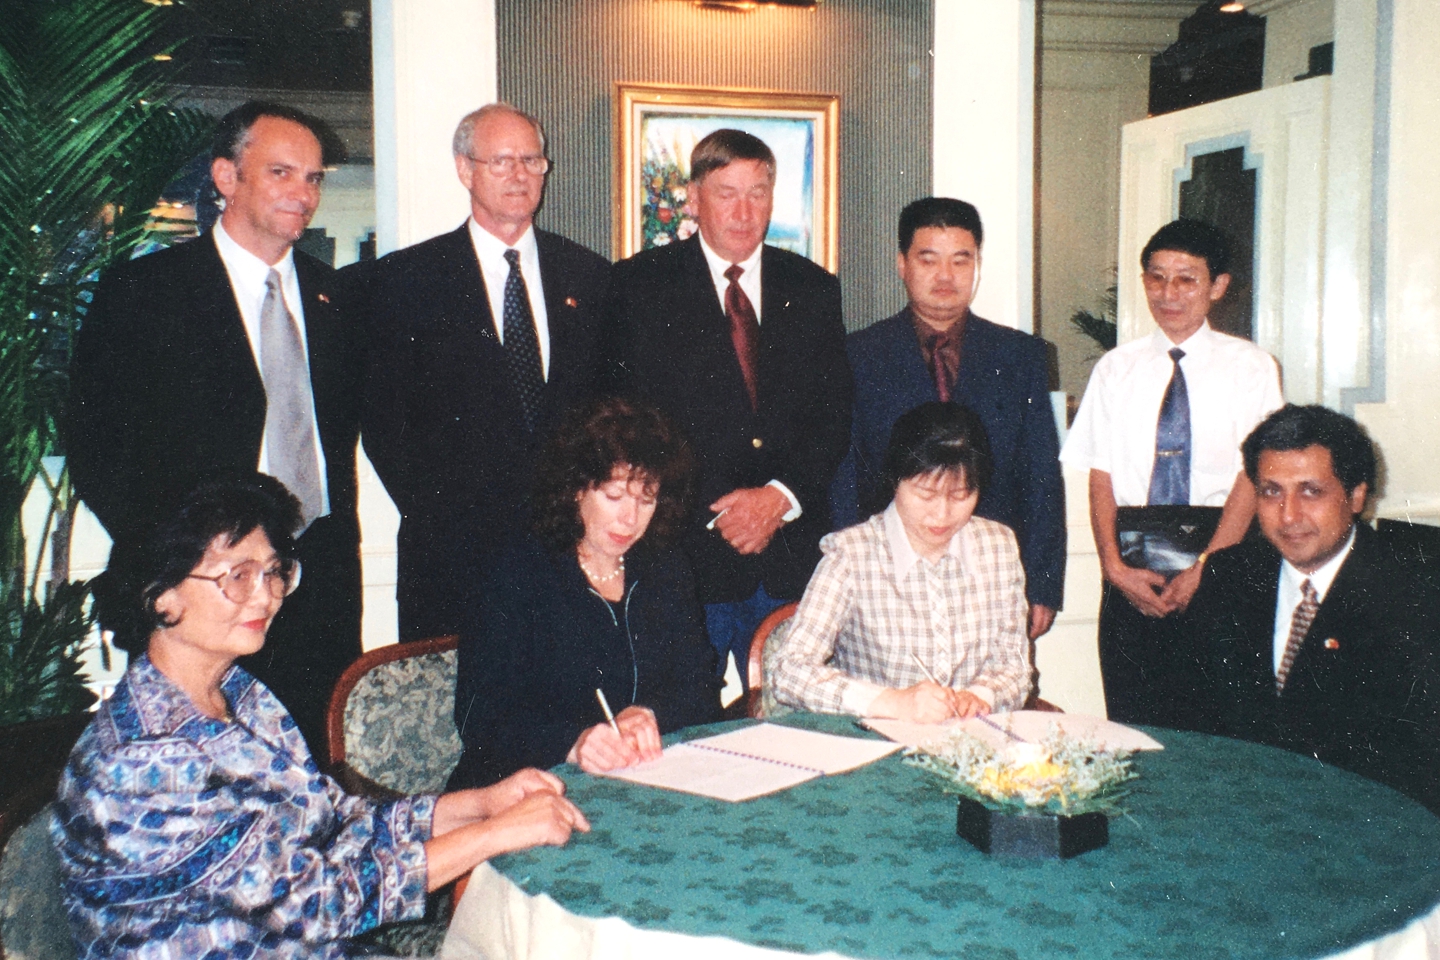 Contract signing, Beijing, China, 1998